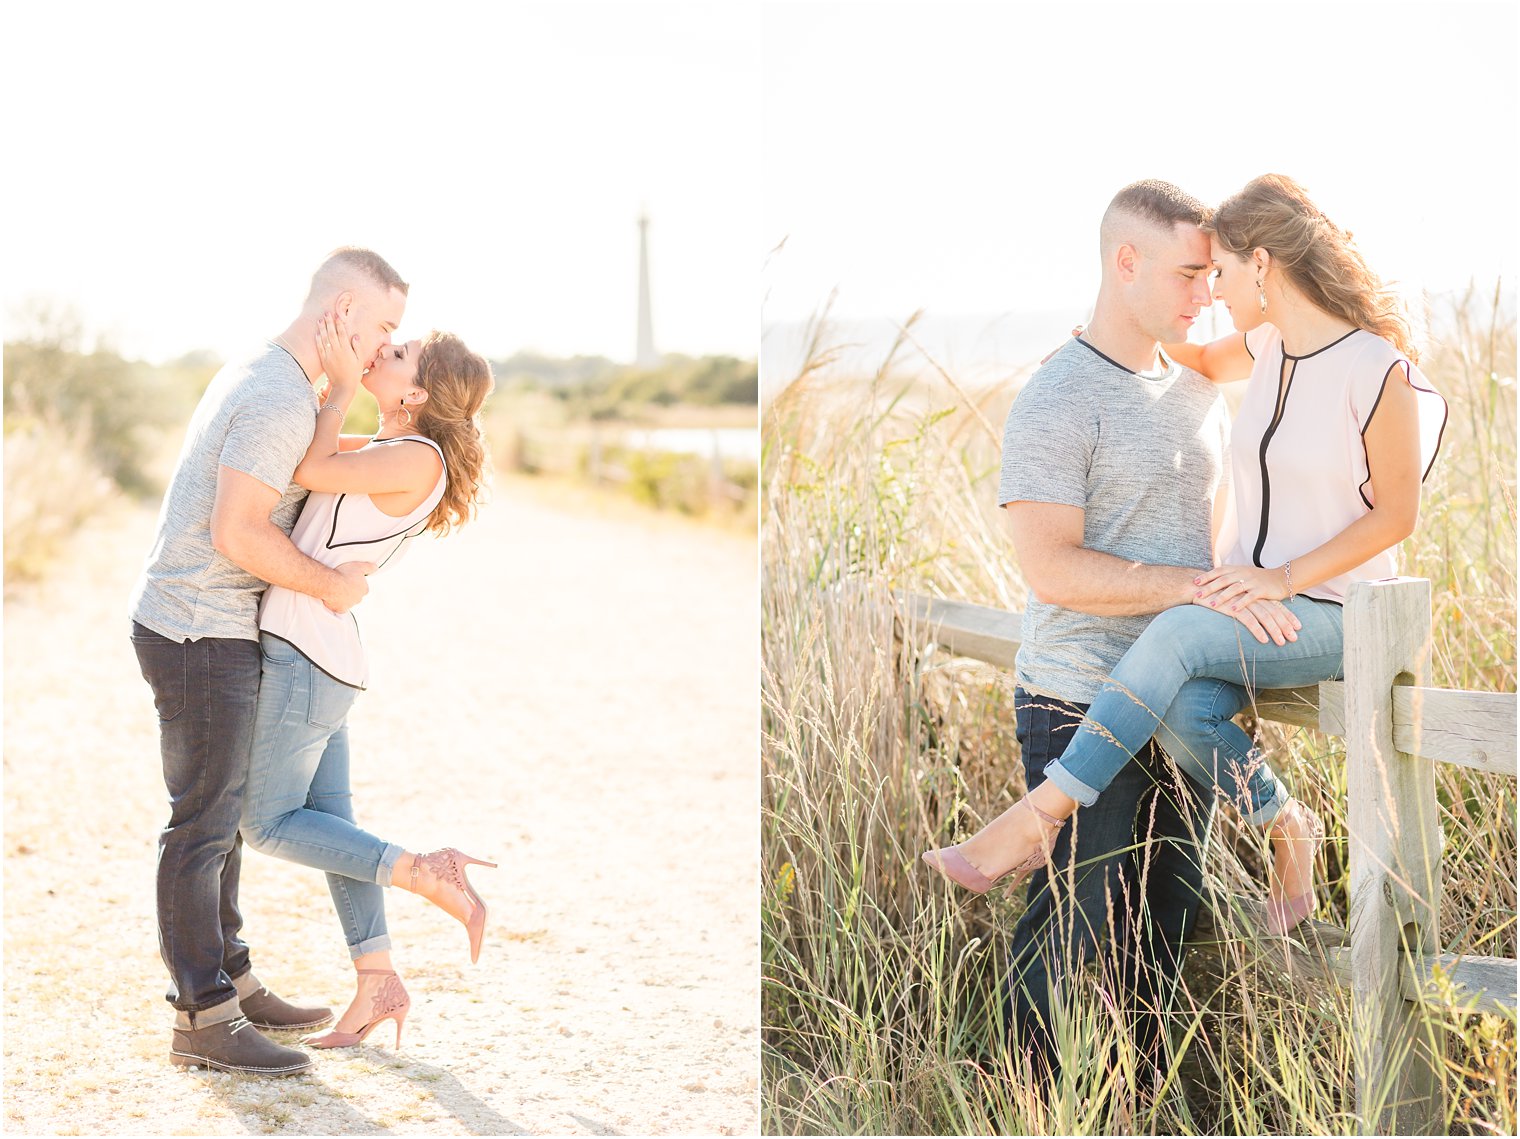 Engagement session by Cape May Lighthouse | Photos by Idalia Photography